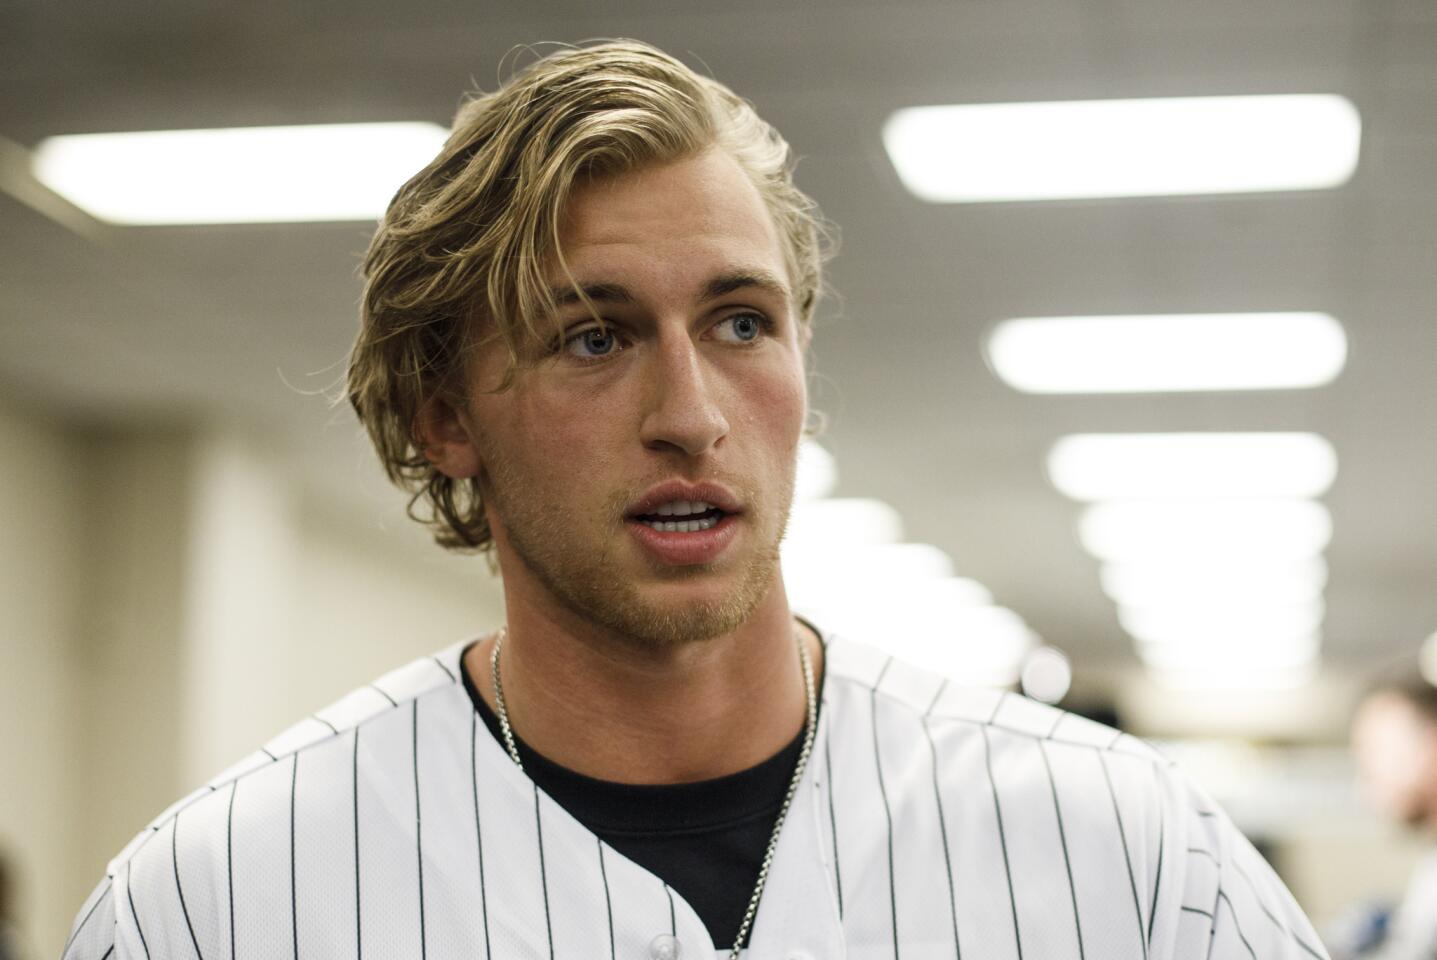 White Sox pitcher Michael Kopech speaks with members of the media during SoxFest 2018 at the Hilton Chicago on Friday, Jan. 26, 2018.